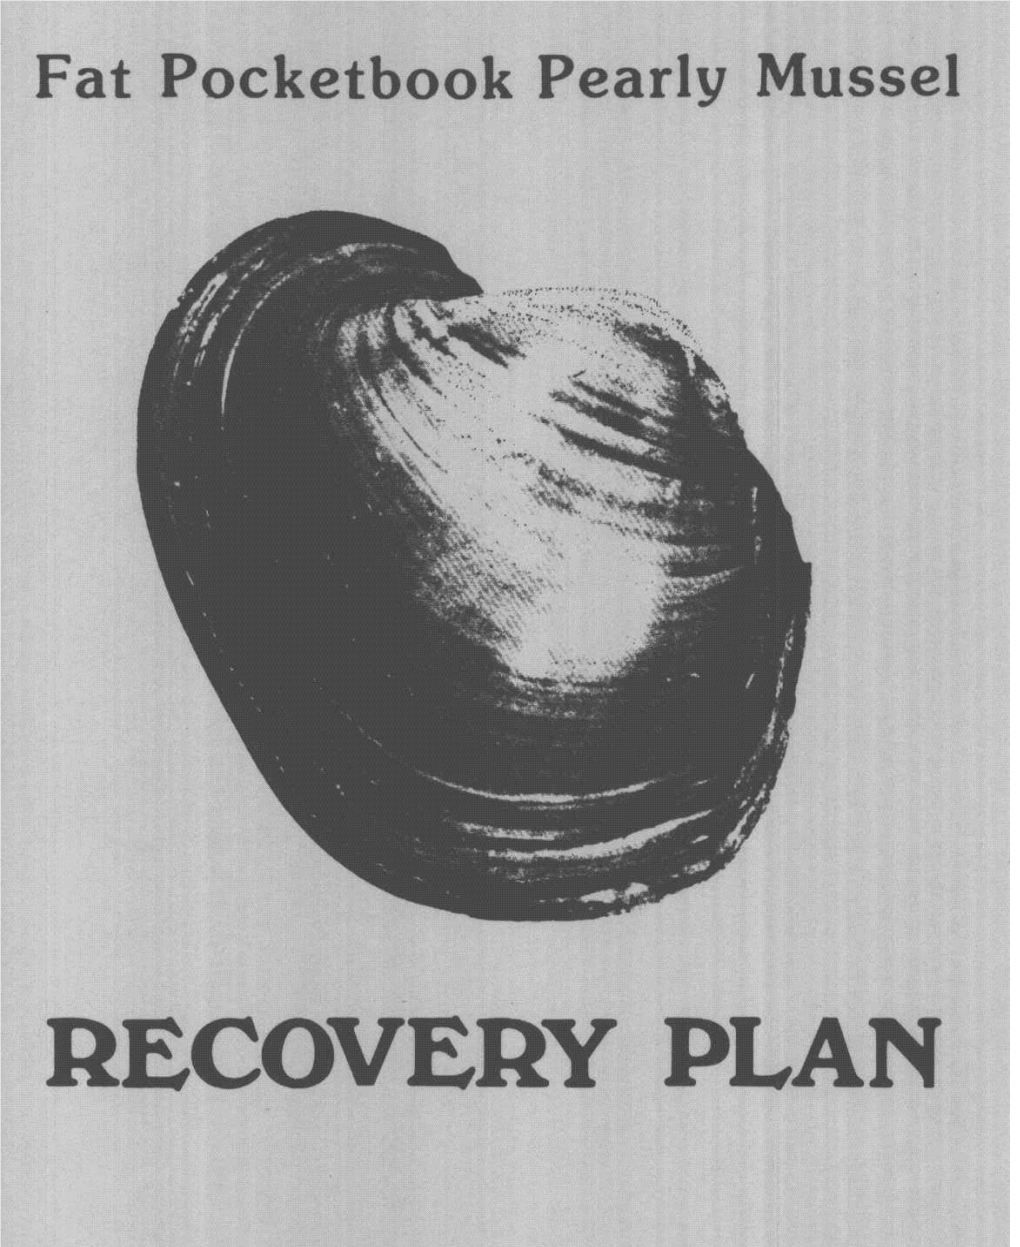 RECOVERY PLAN a RECOVERY PLAN for the FAT POCKETBOOK PEARLY MUSSEL Potamilus Capax (Green 1832)